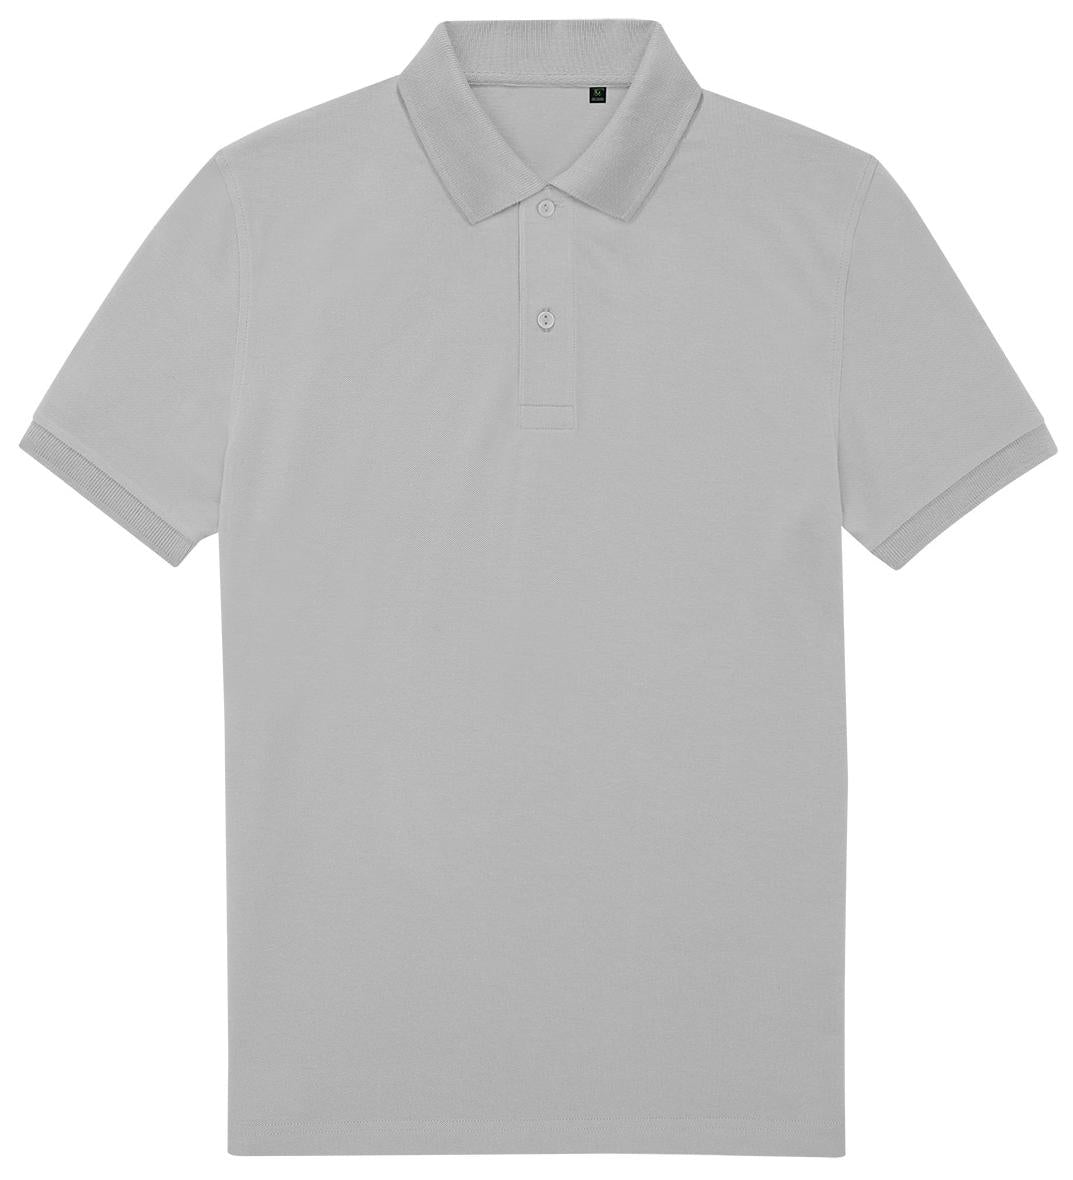 B&C Collection My Eco Polo 65/35 - Pacific Grey